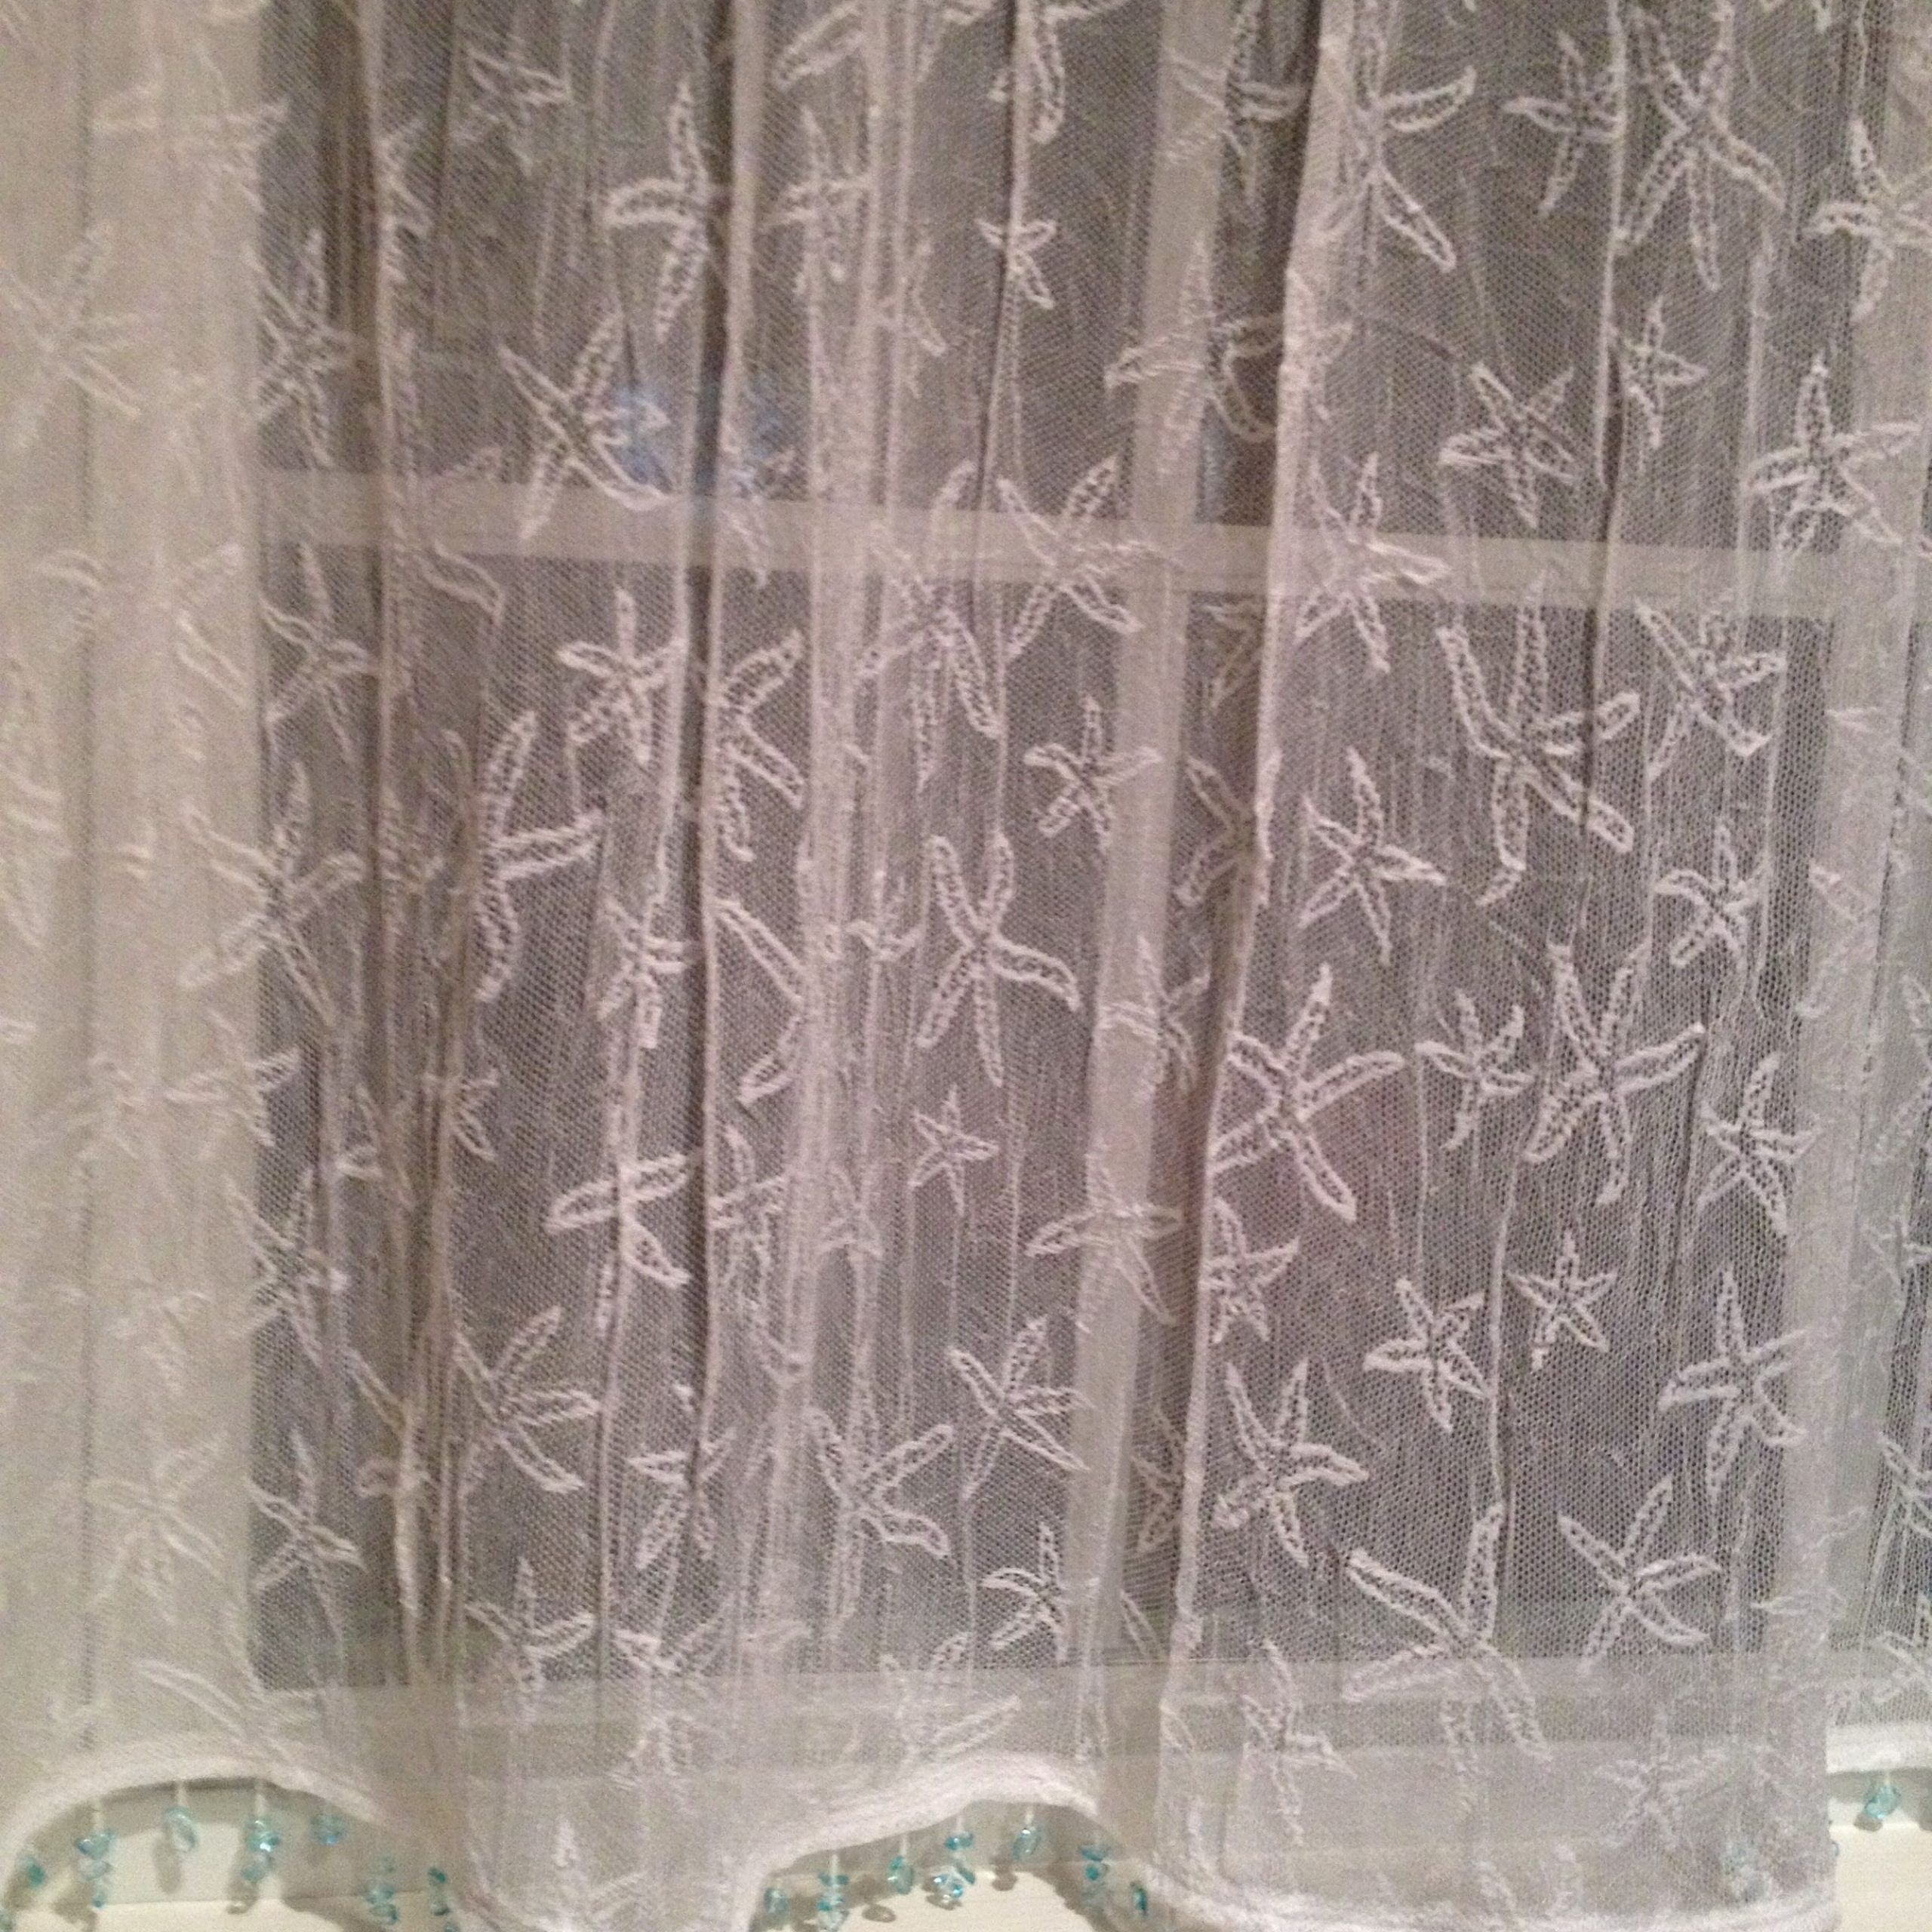 Coastal Starfish Curtains  Sheer With Aqua Sea Glass Bead Within Marine Life Motif Knitted Lace Window Curtain Pieces (Photo 7 of 20)